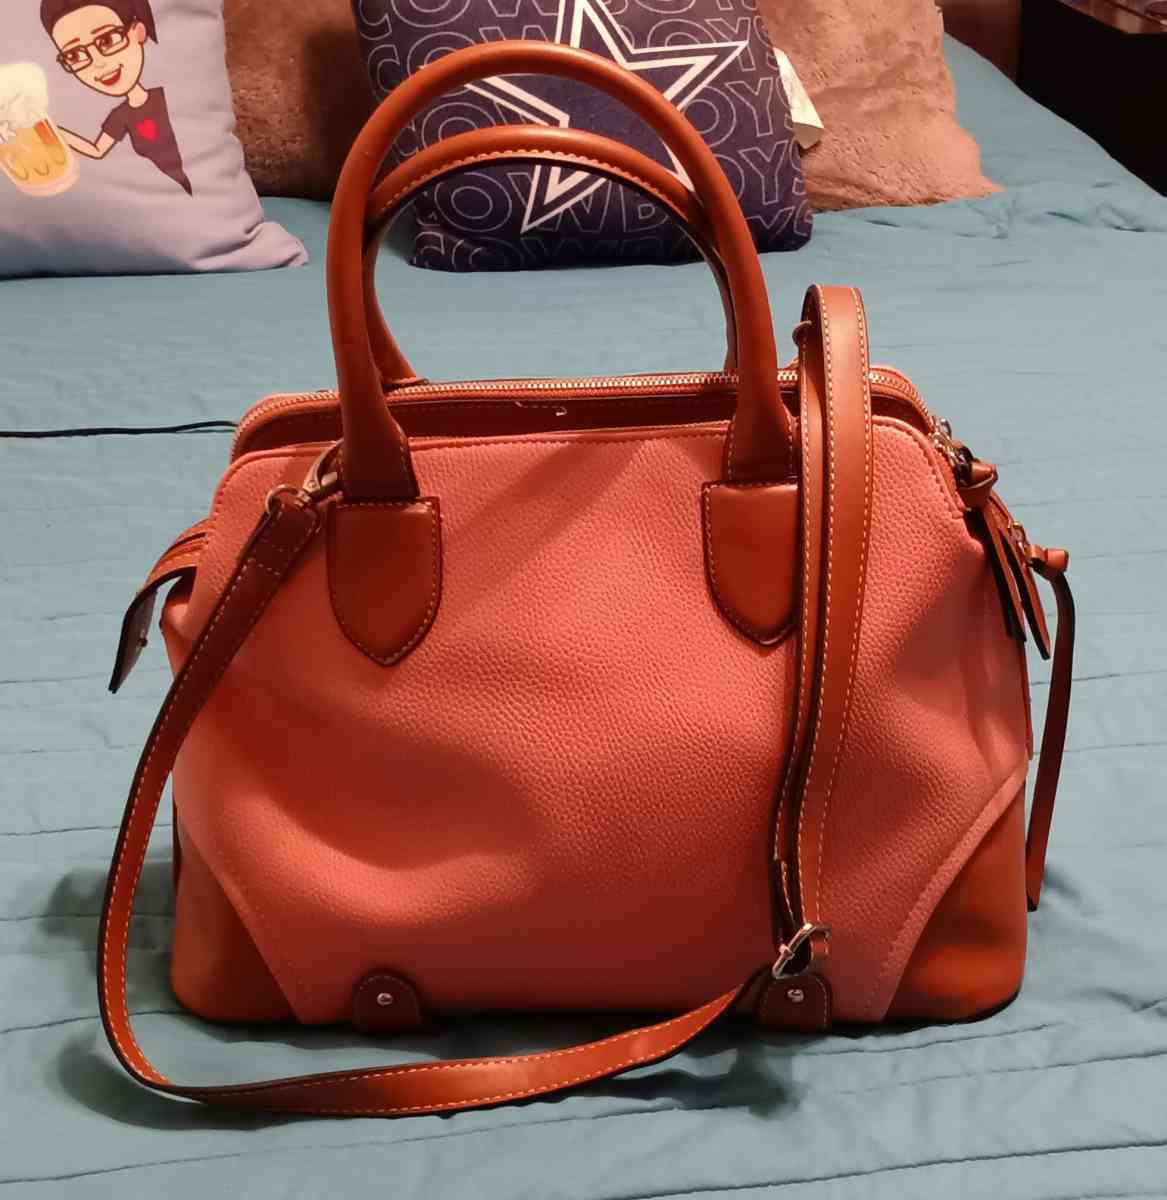 Pink and brown purse